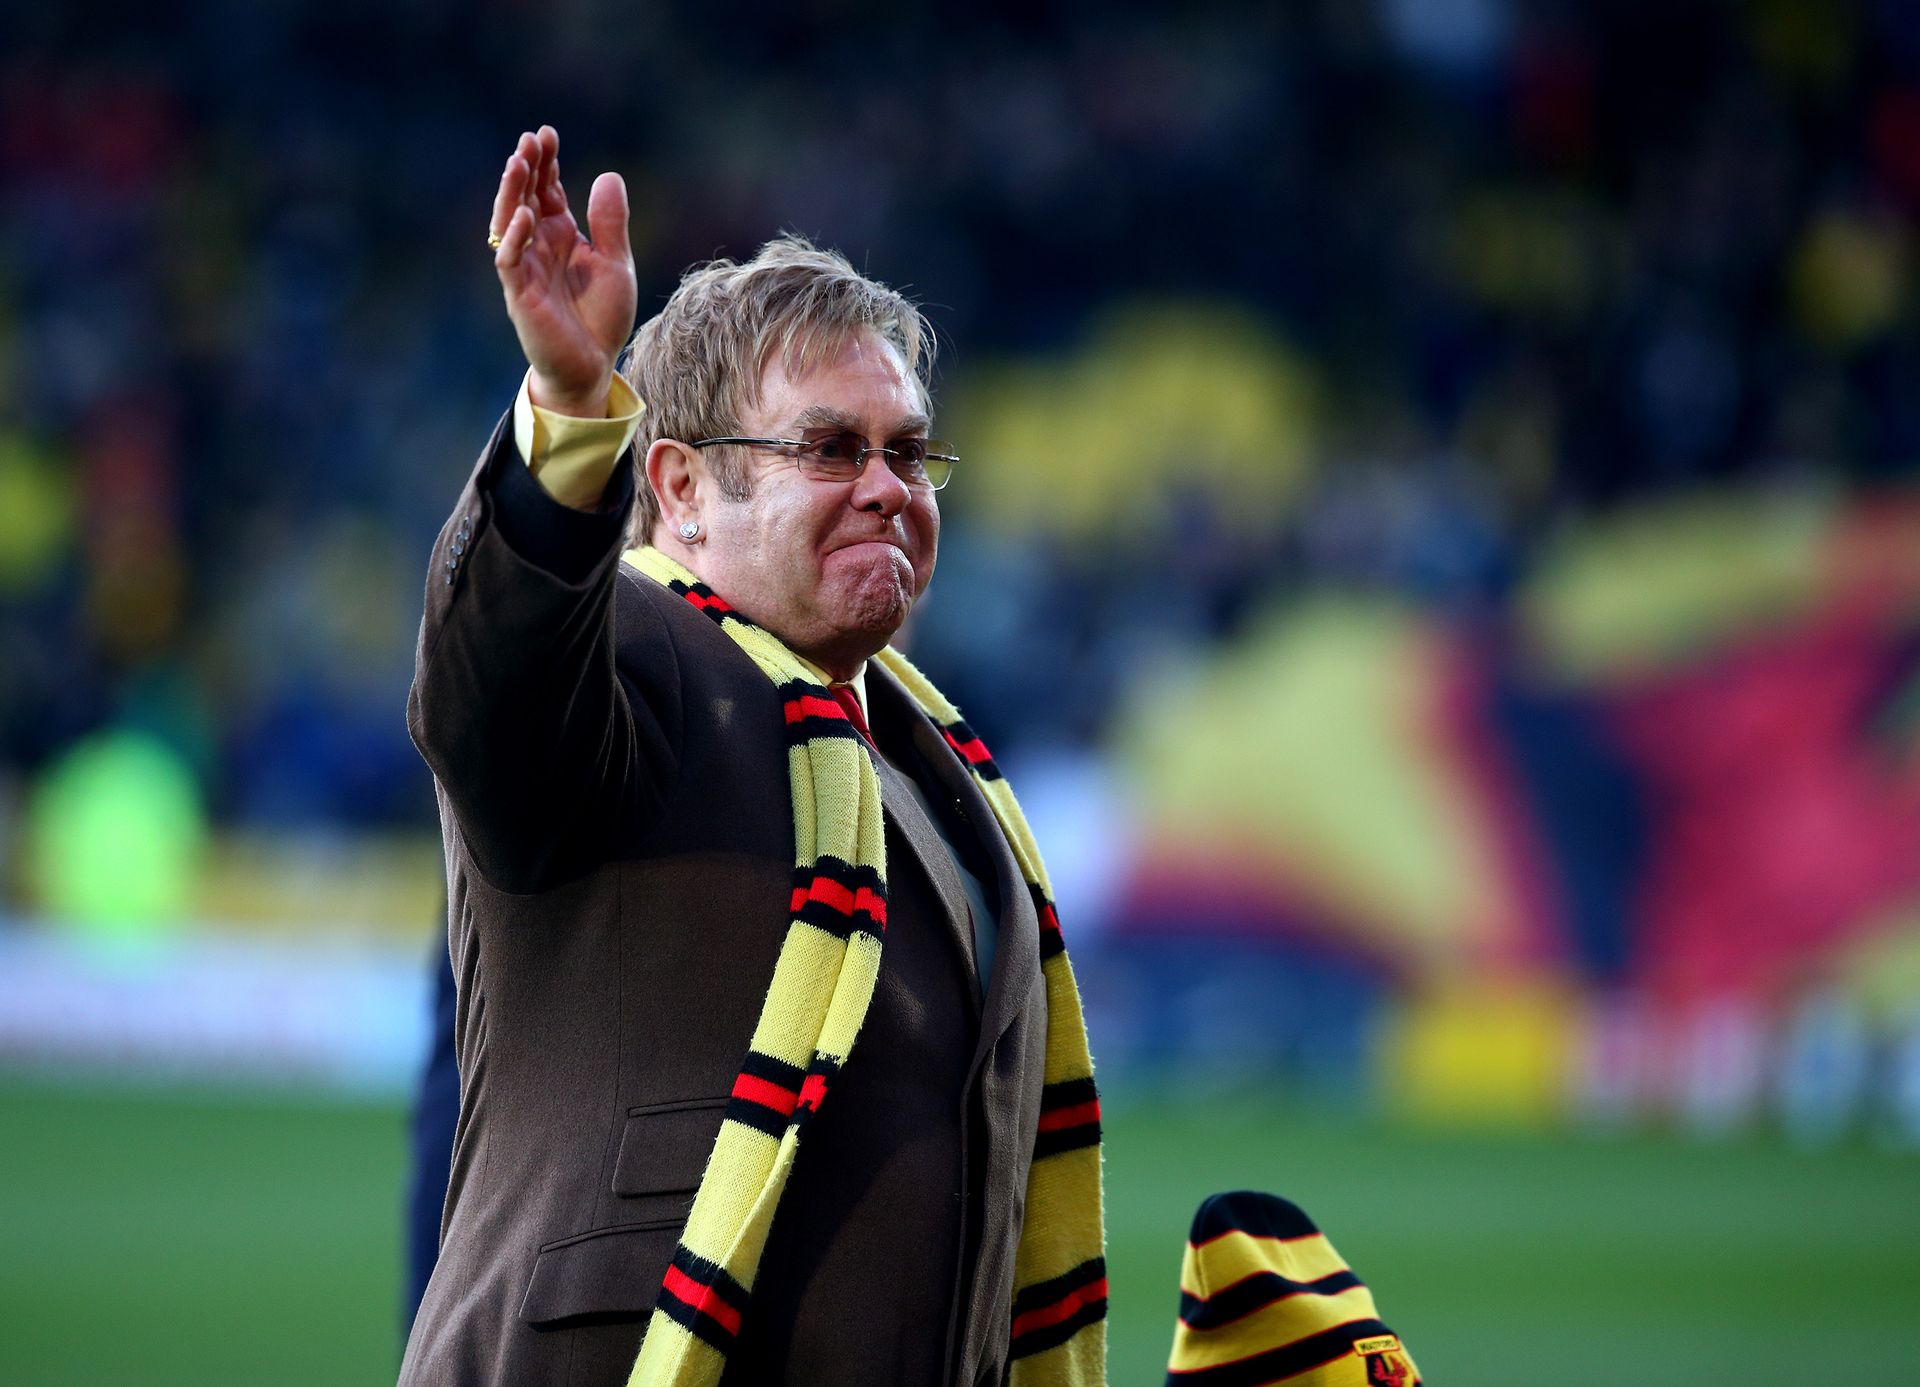 <p>                     Sir Elton John started watching Watford at Vicarage Road with his father at the age of five and has had a long affiliation with the club since.                   </p>                                      <p>                     The singer bought Watford in 1976, became chairman and president, and guided the Hornets up through the leagues. He sold the club in 1990, but later bought it back and eventually stepped down in 2002. He remains honorary life-president and is still a big fan.                   </p>